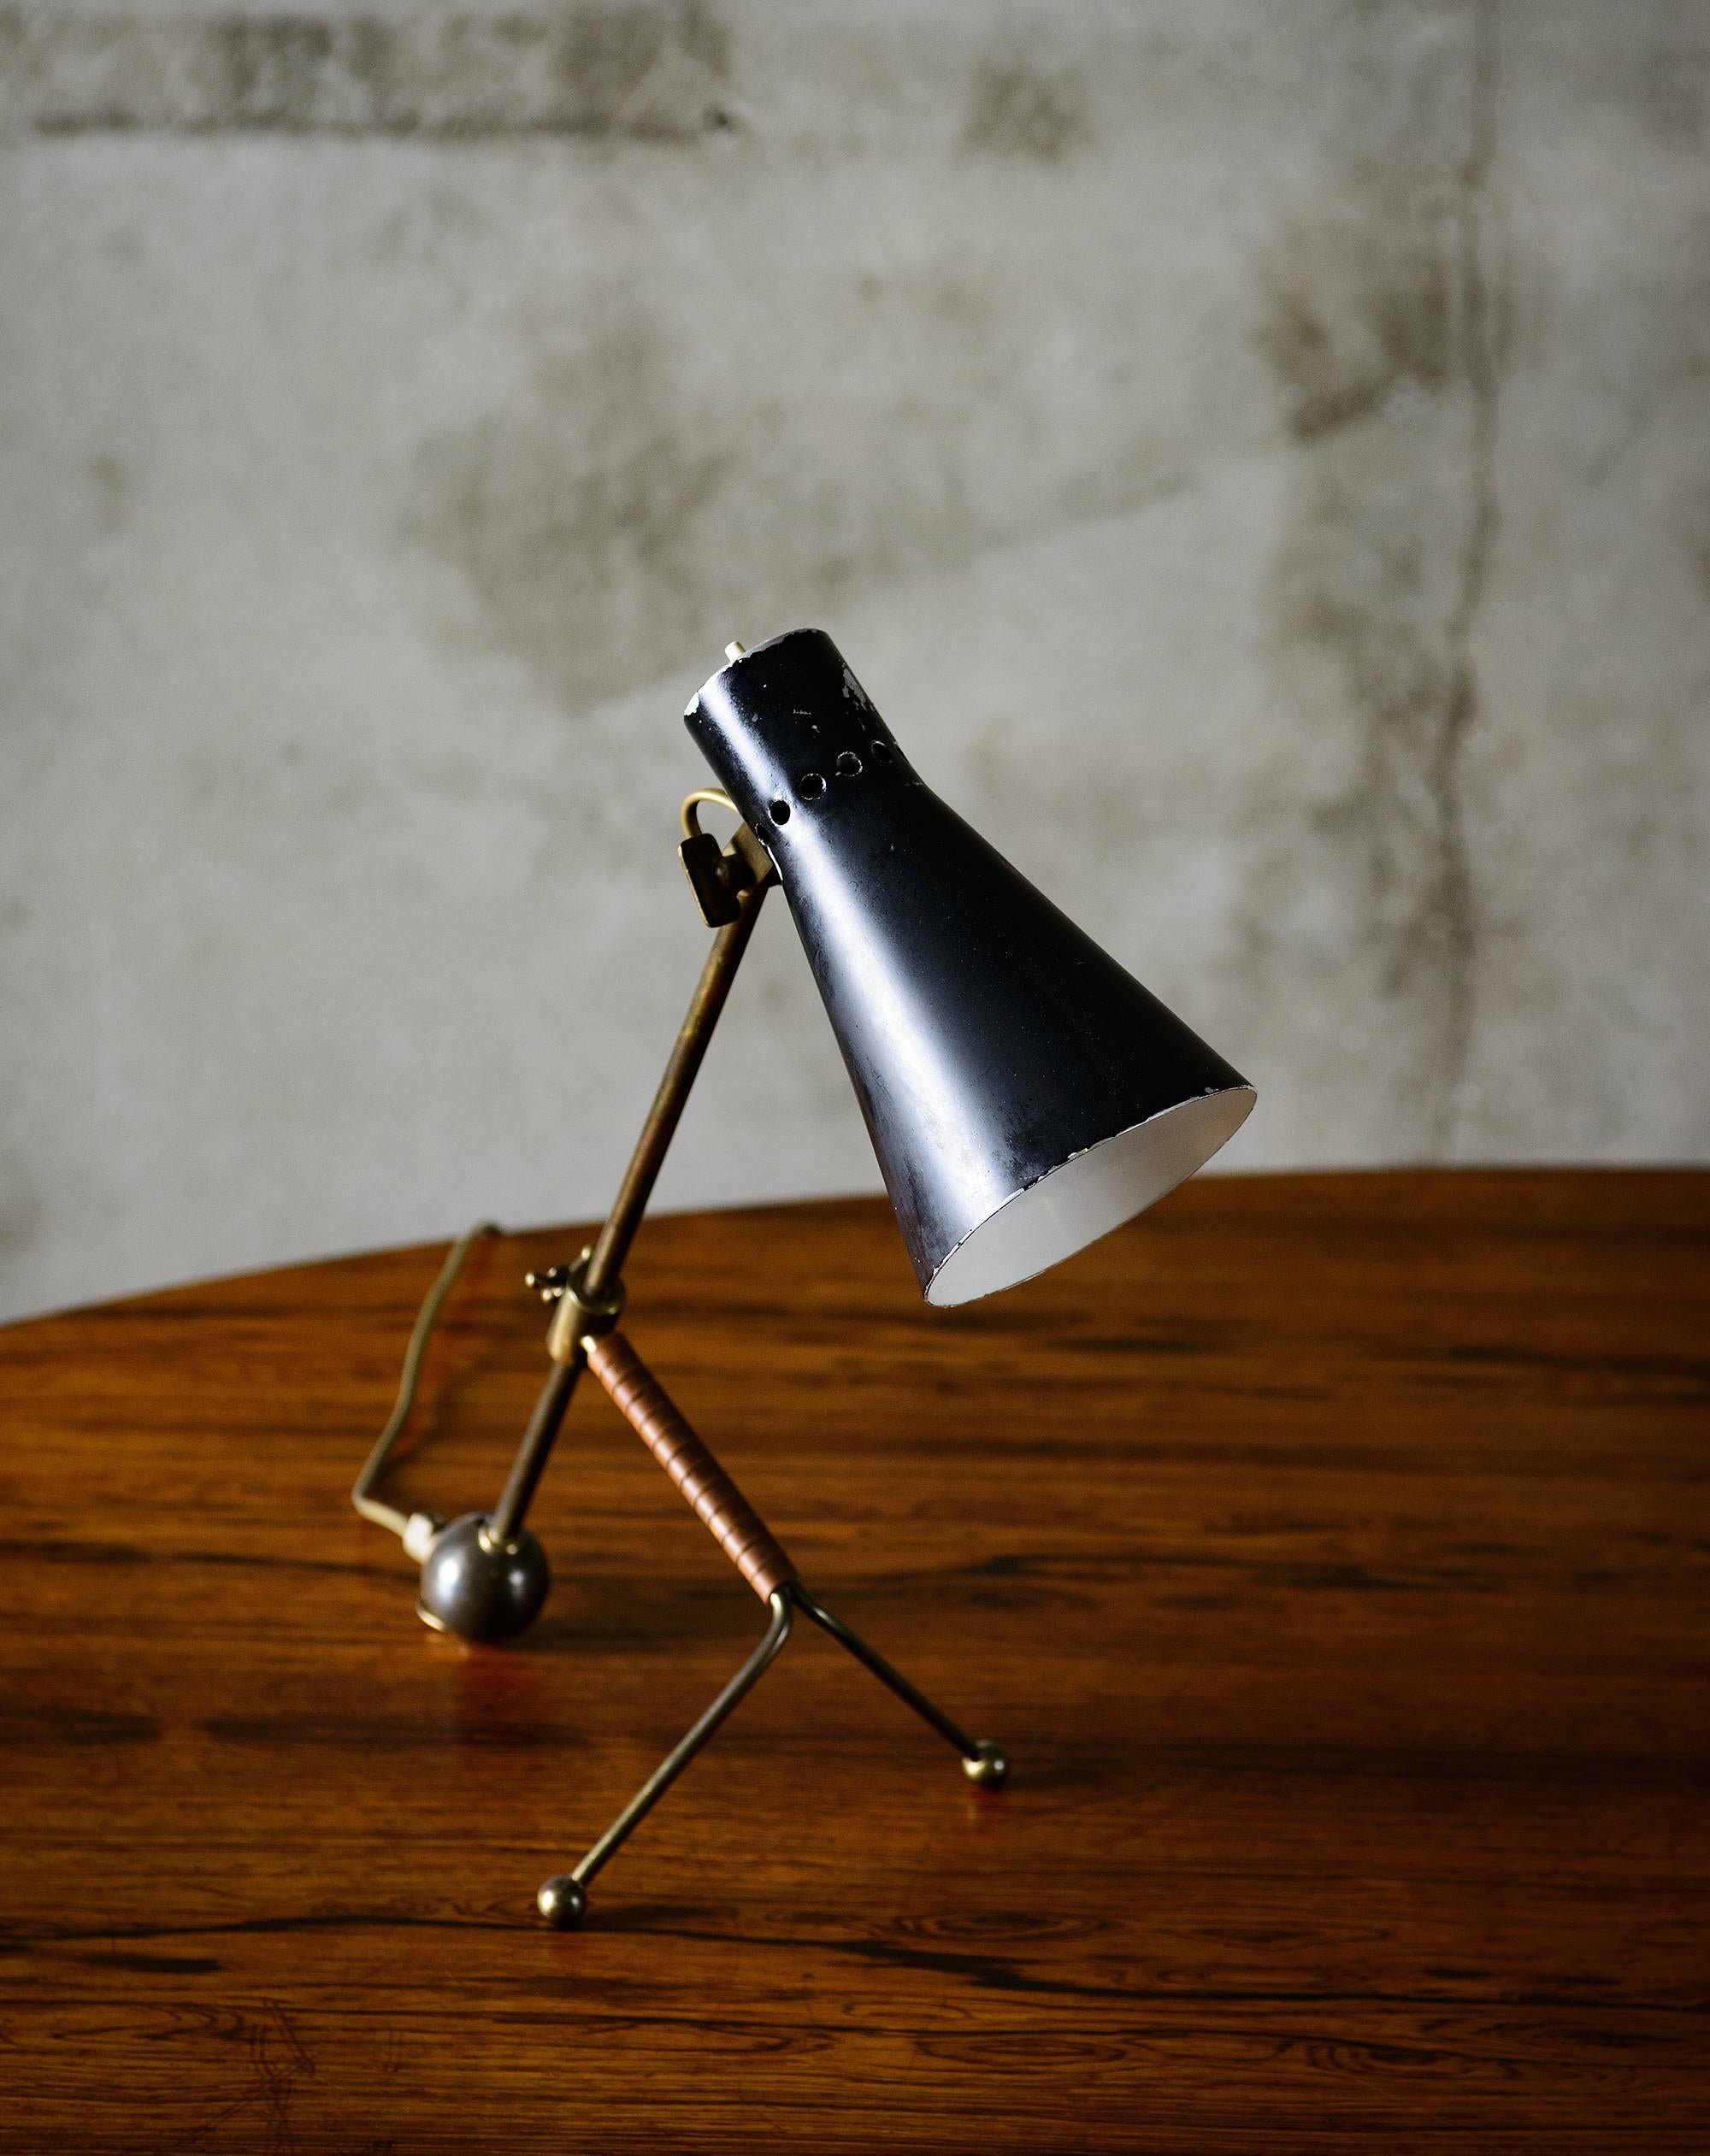 An icon of Scandinavian design the Tapio Wirkkala table lamp boasts tubular brass with enameled aluminum. Produced by Idman, Model K11-16, Finland, 1958. The lamp is in good condition with minor scratches on shade. Vintage.